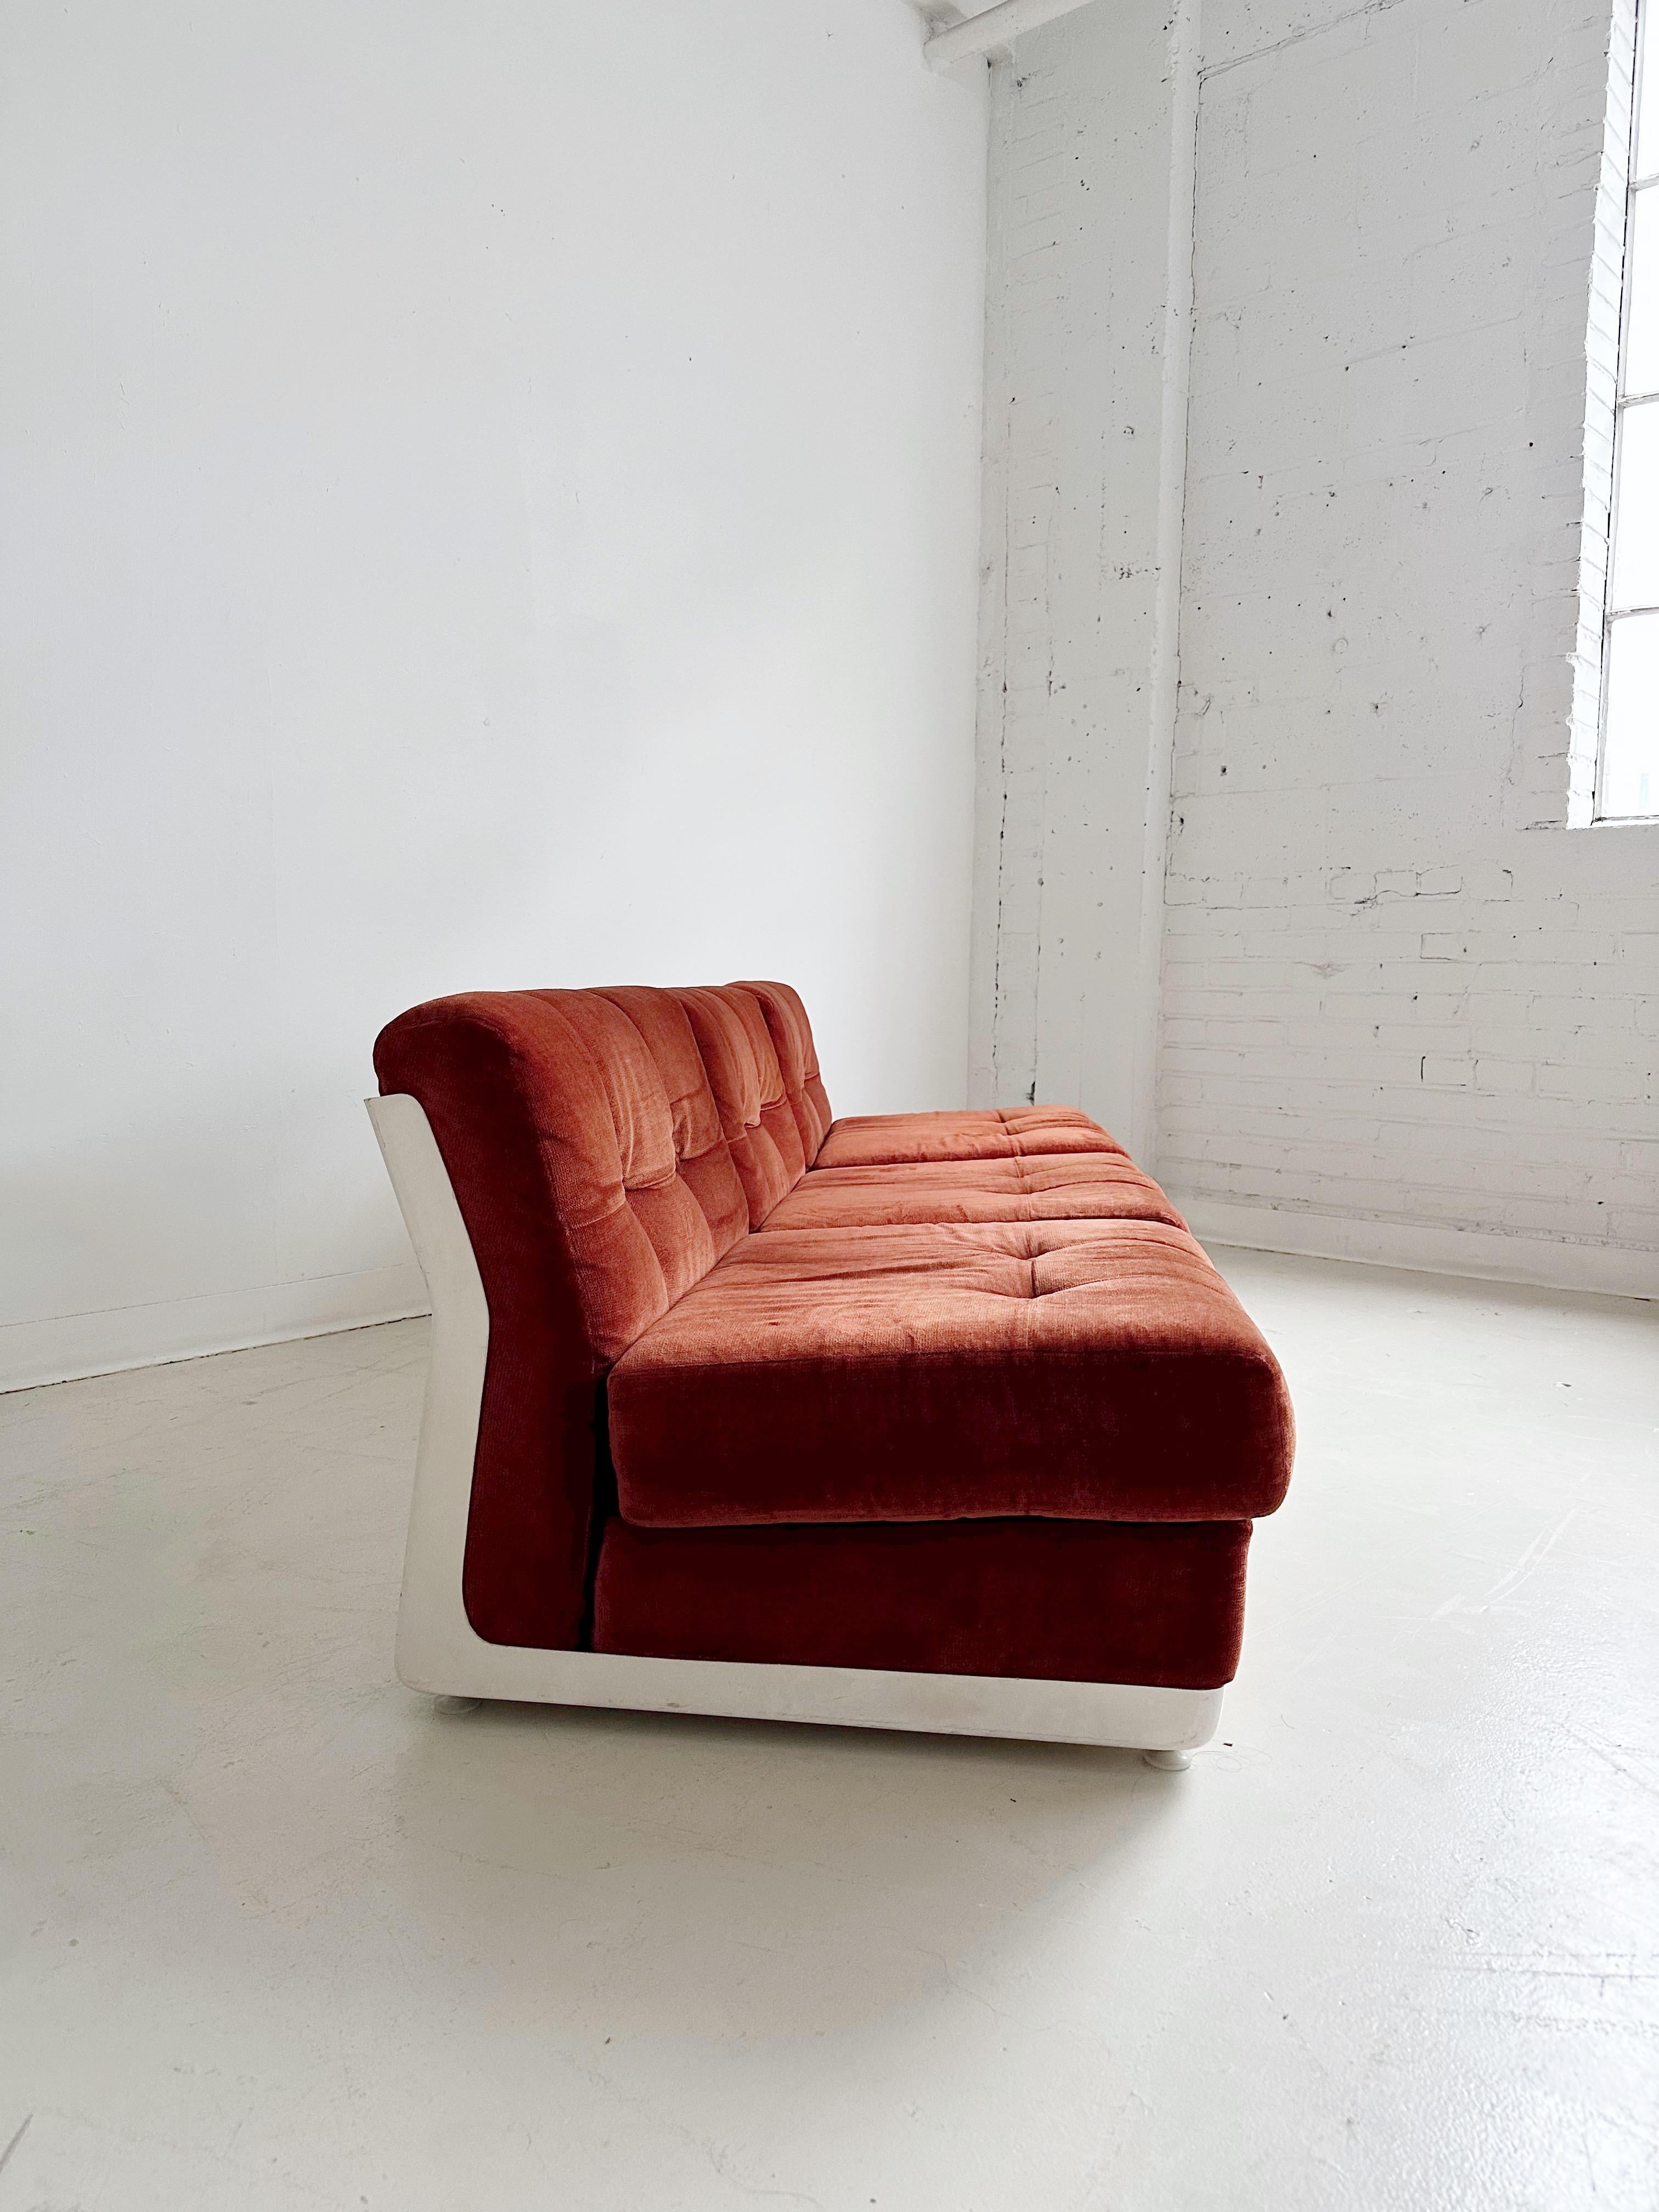 3 Seater Modular Sofa in the style of Amanta by Mario Bellini, 70's

Features a fibreglass frame and Red Brick Velvet upholstery

//

Dimensions:

29”W x 31”D x 25”H  seat height 15